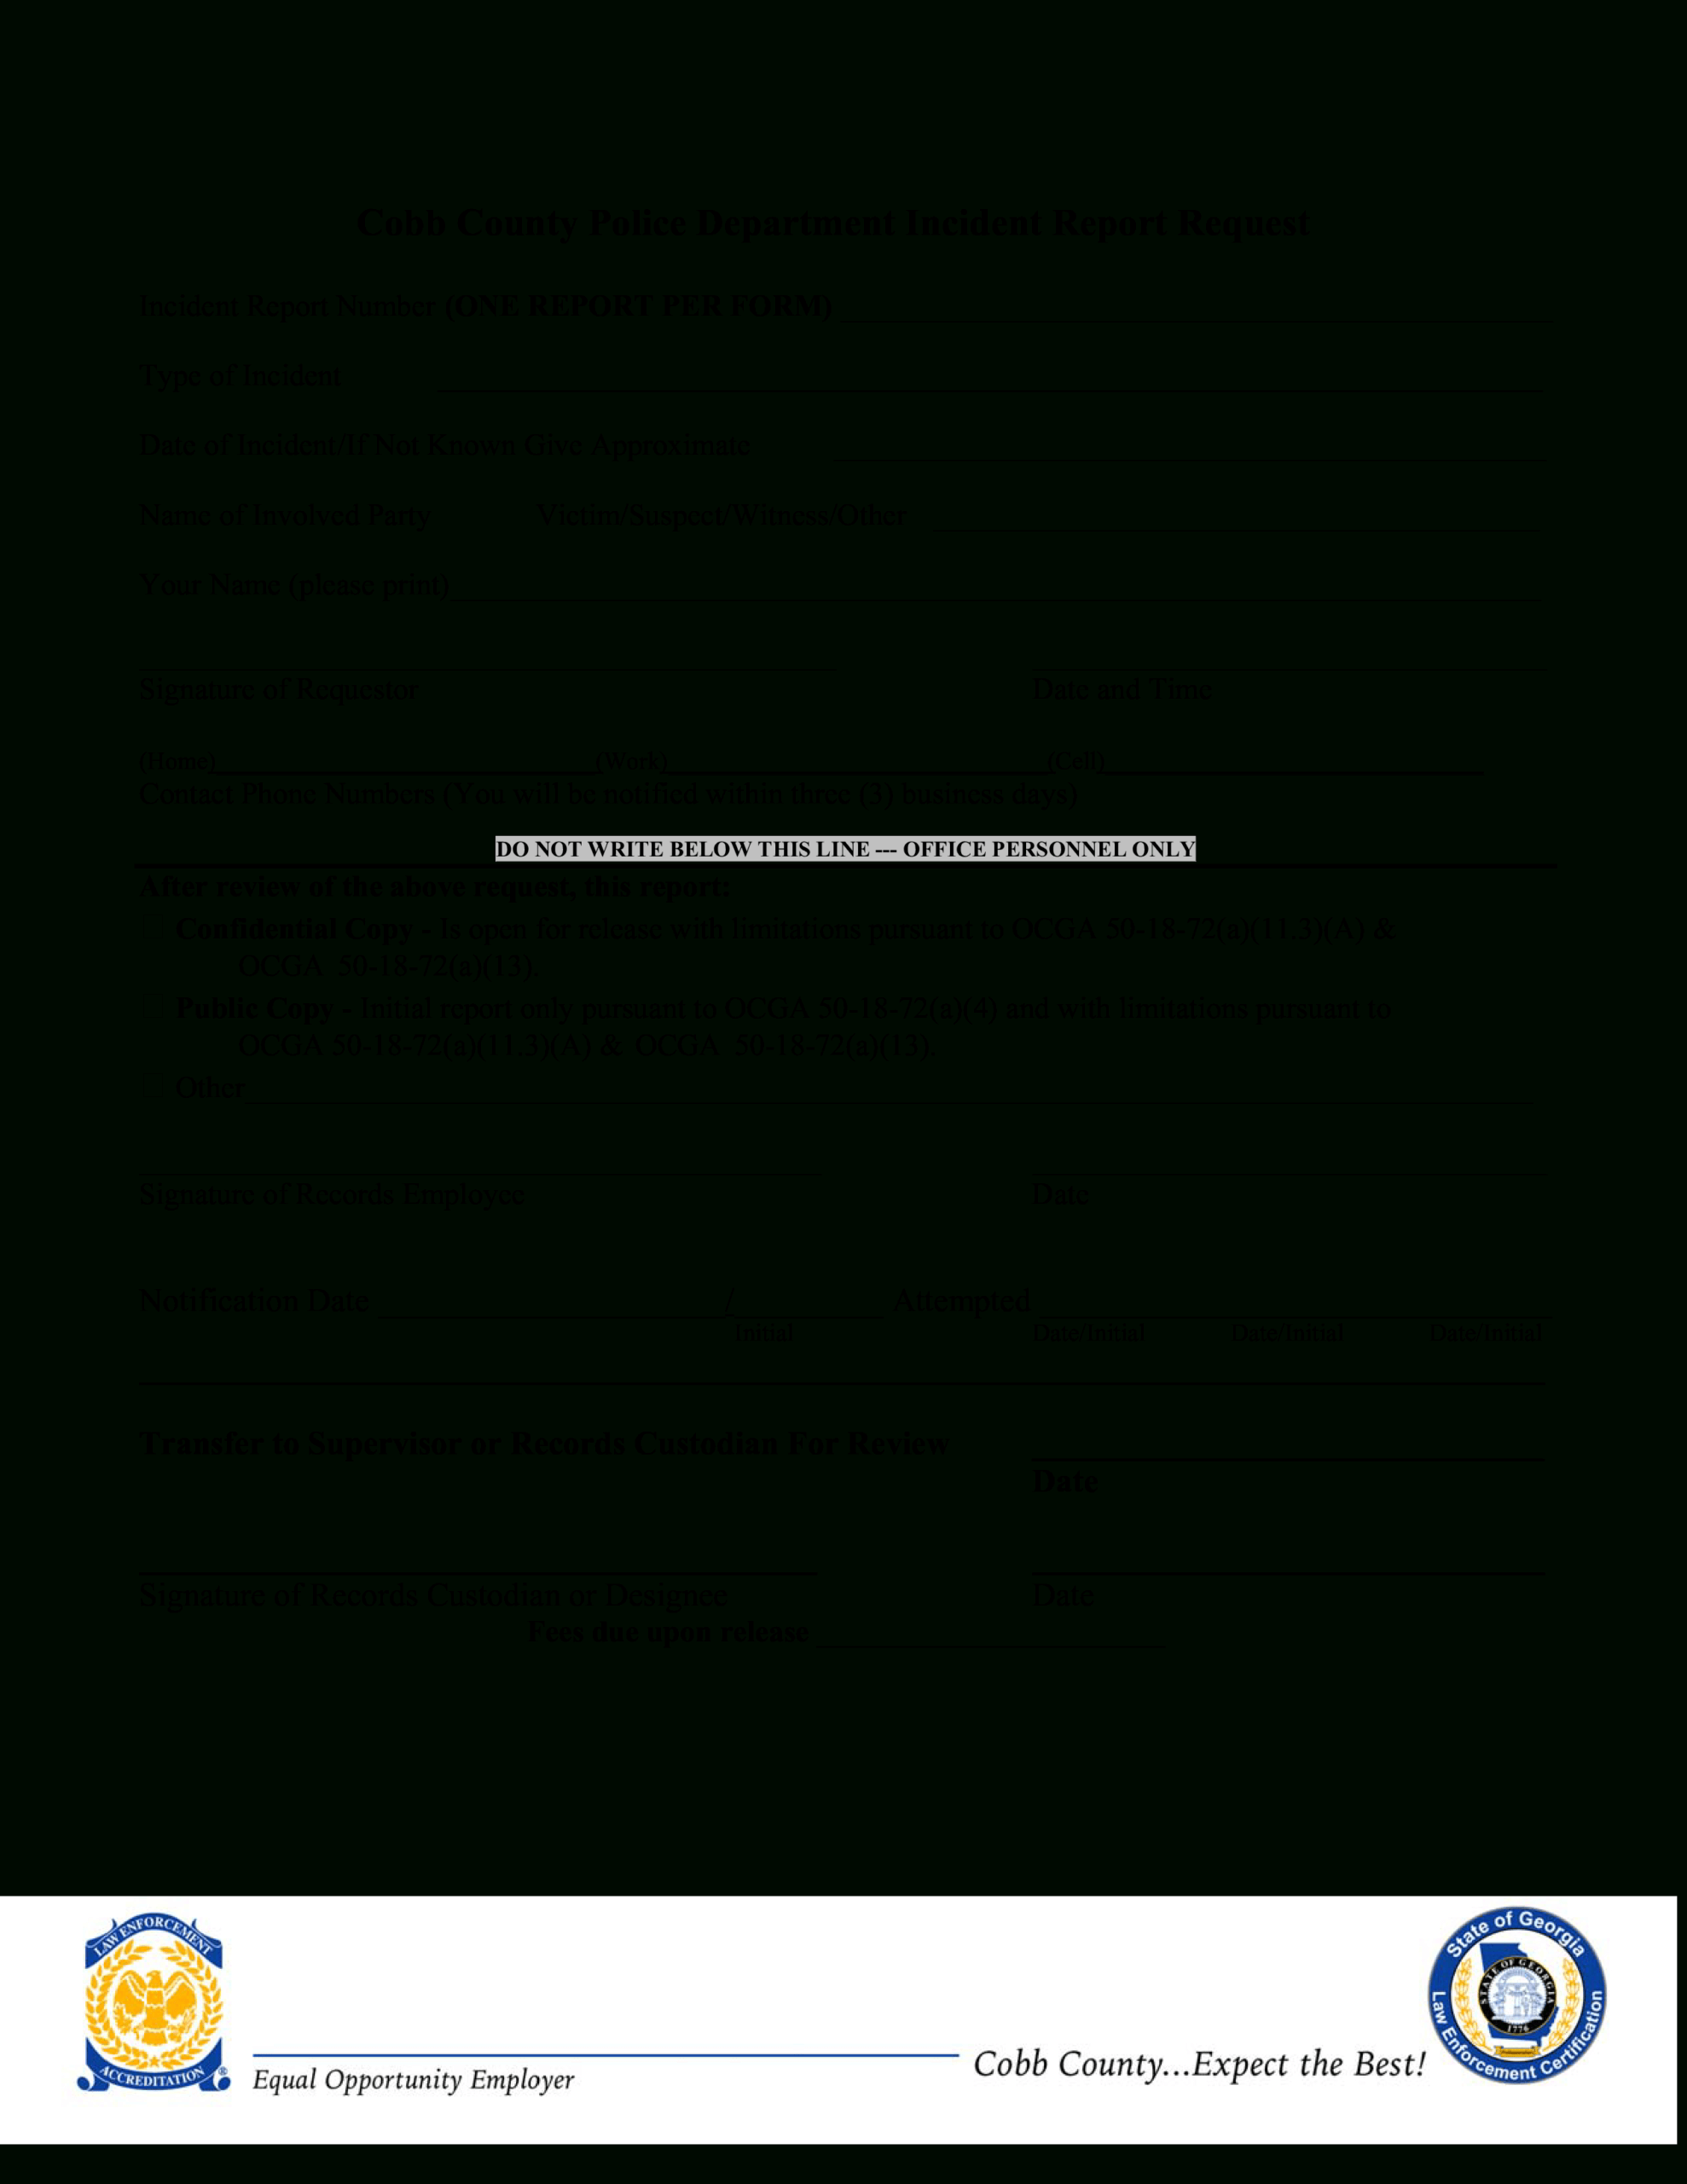 Blank Police Incident Report | Templates At Pertaining To Blank Police Report Template